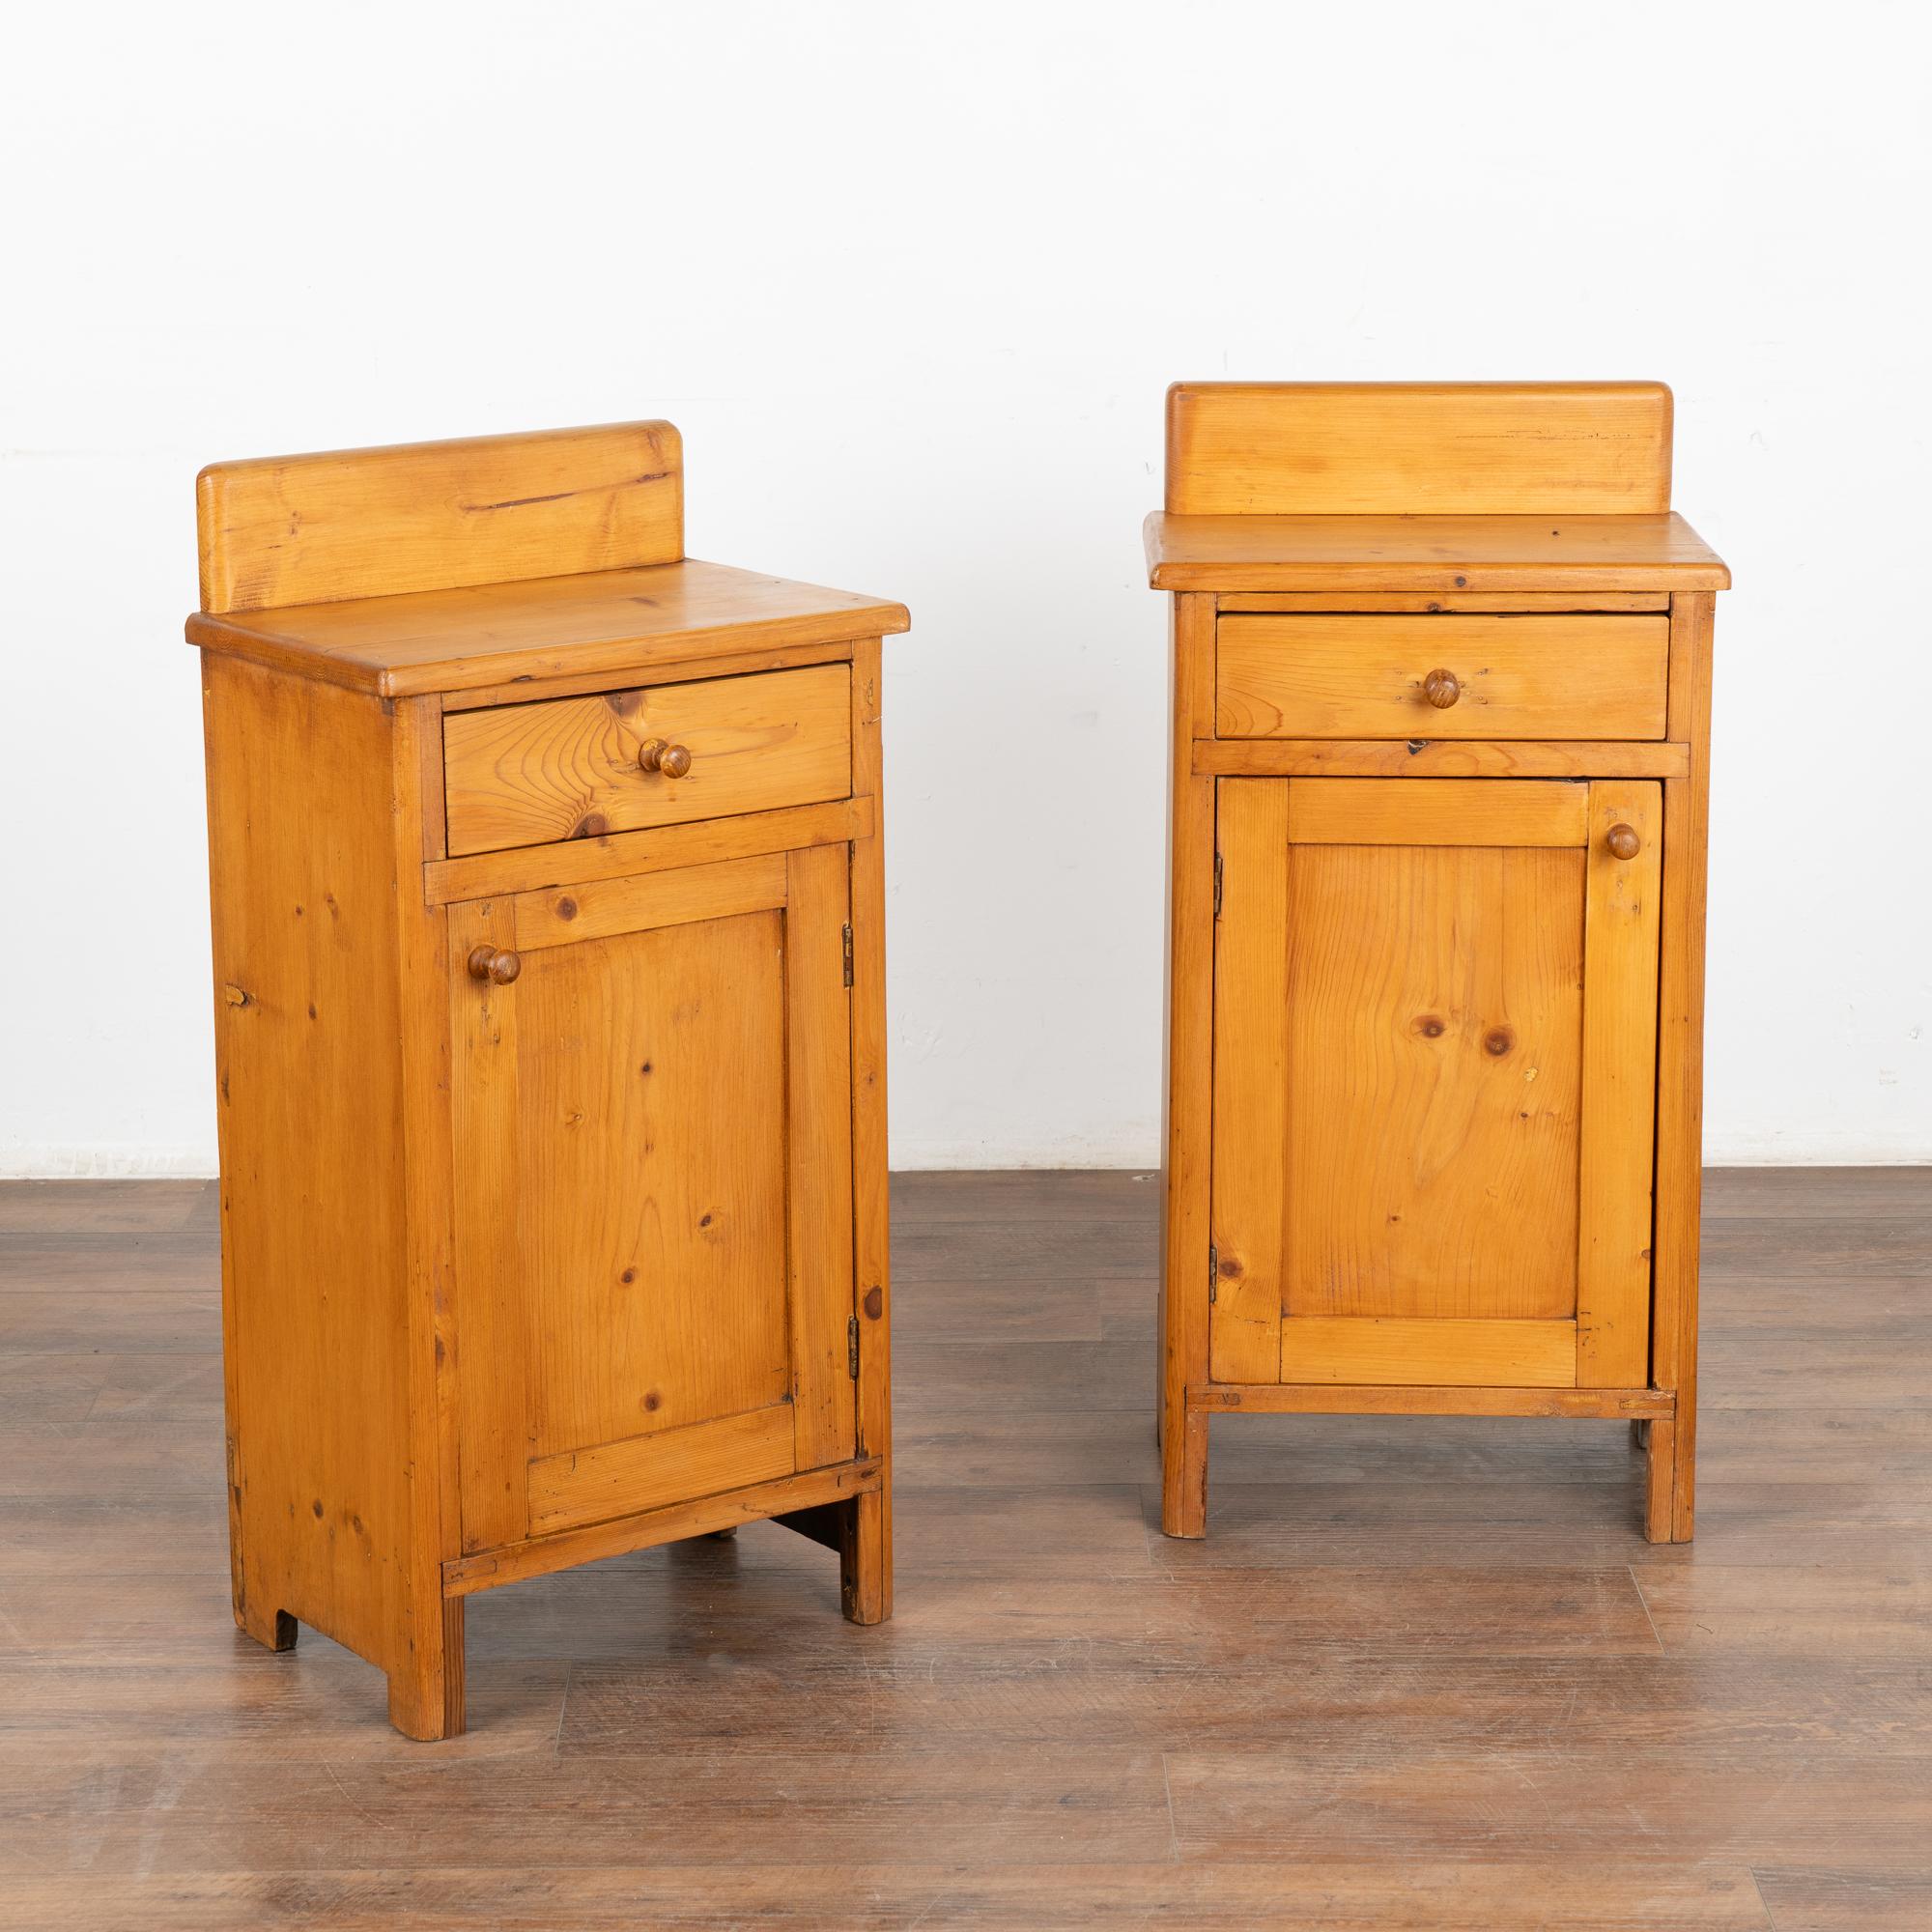 Pair of small pine nightstands, drawer over door with simple backsplash on top.
One nightstand opens to left, the other to right, interior holds one shelf.
Restored, strong, stable and waxed to bring out the natural warmth of the pine. 
Any